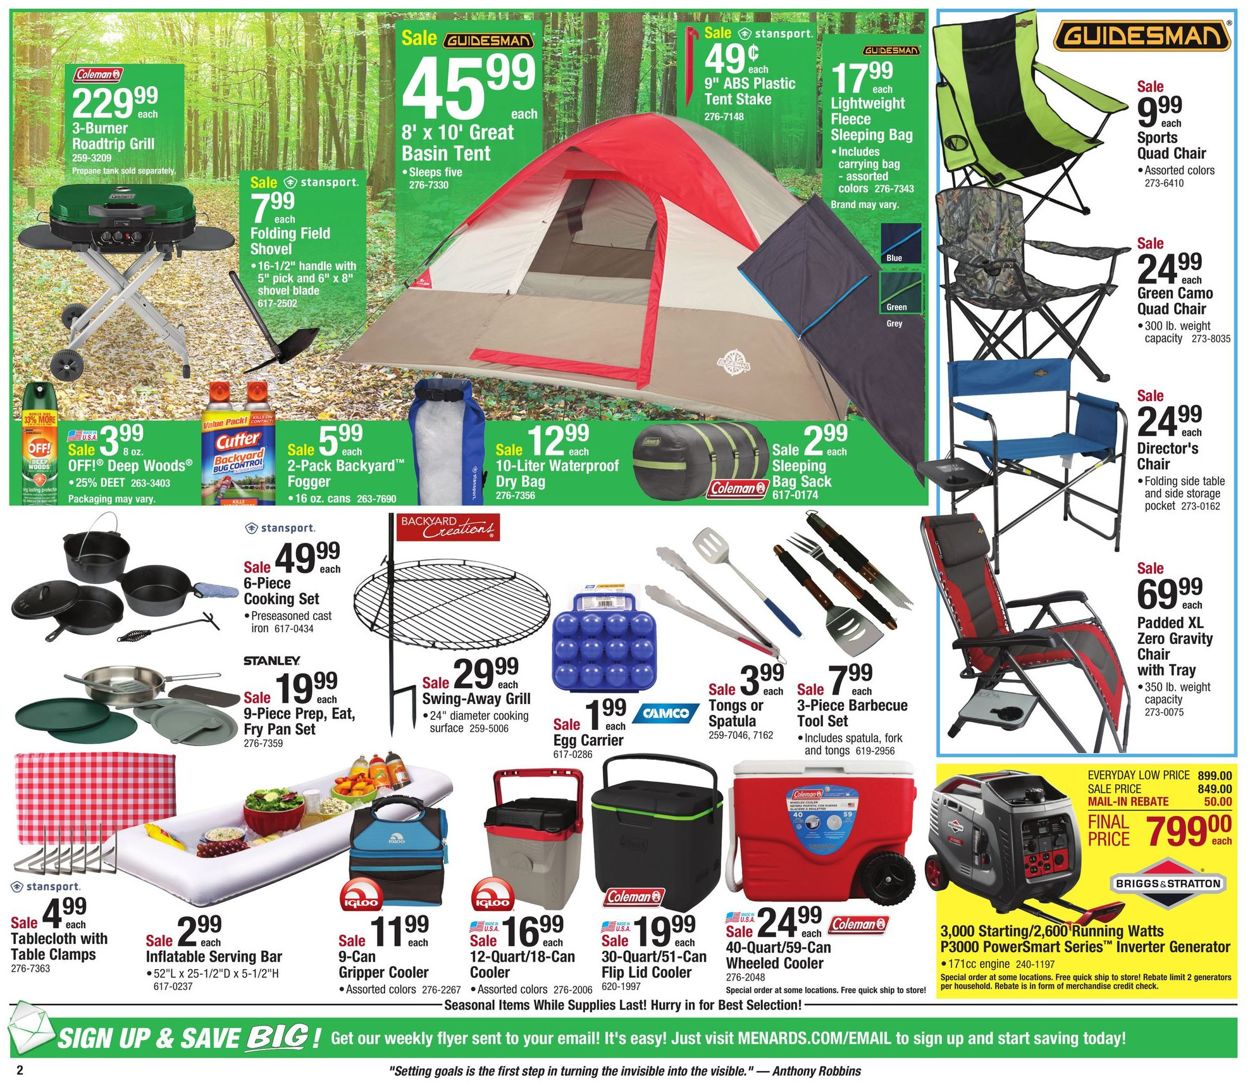 Menards Current weekly ad 05/19 - 06/02/2019 [4] - 0